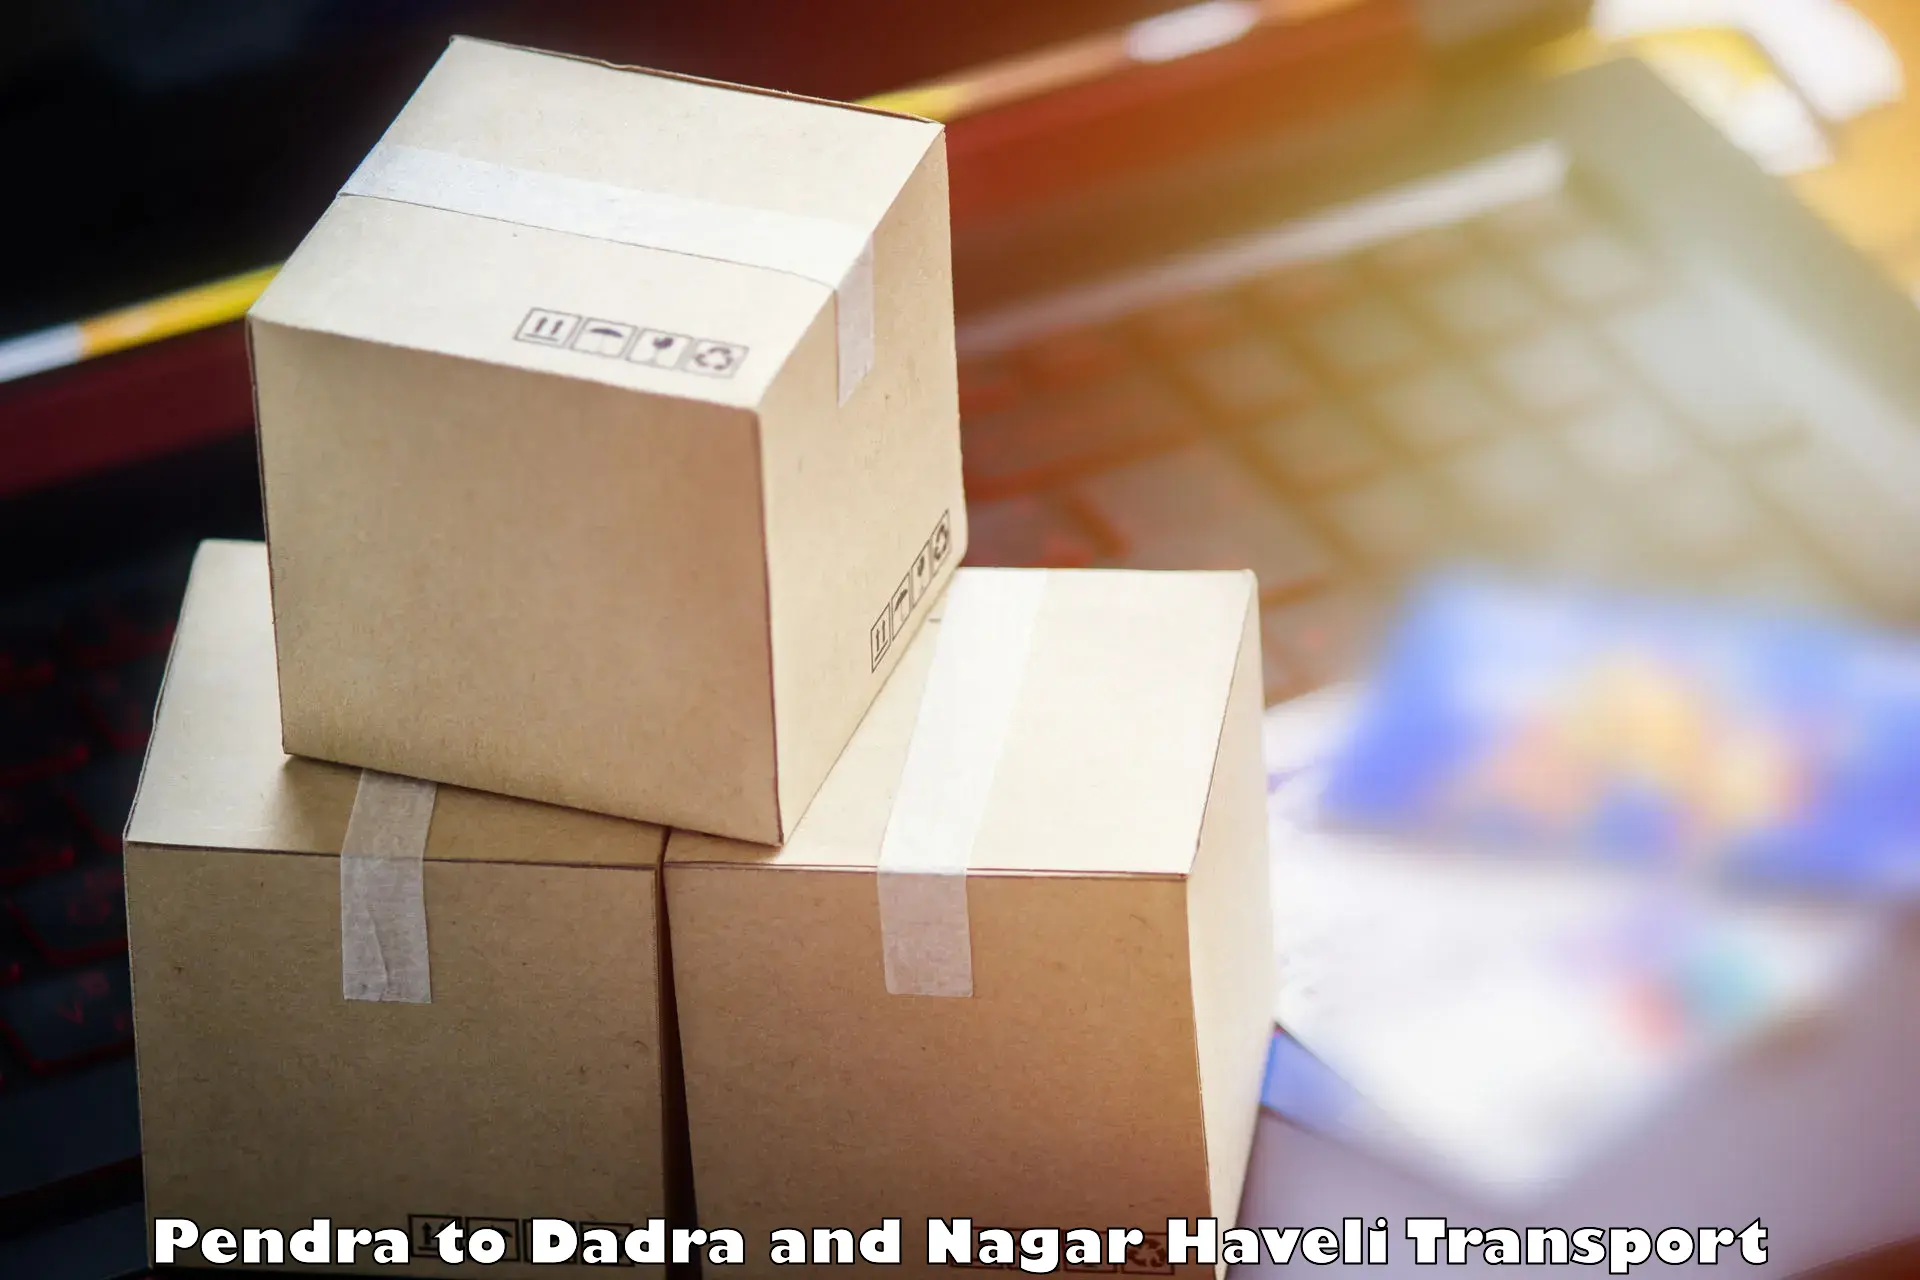 Commercial transport service Pendra to Dadra and Nagar Haveli